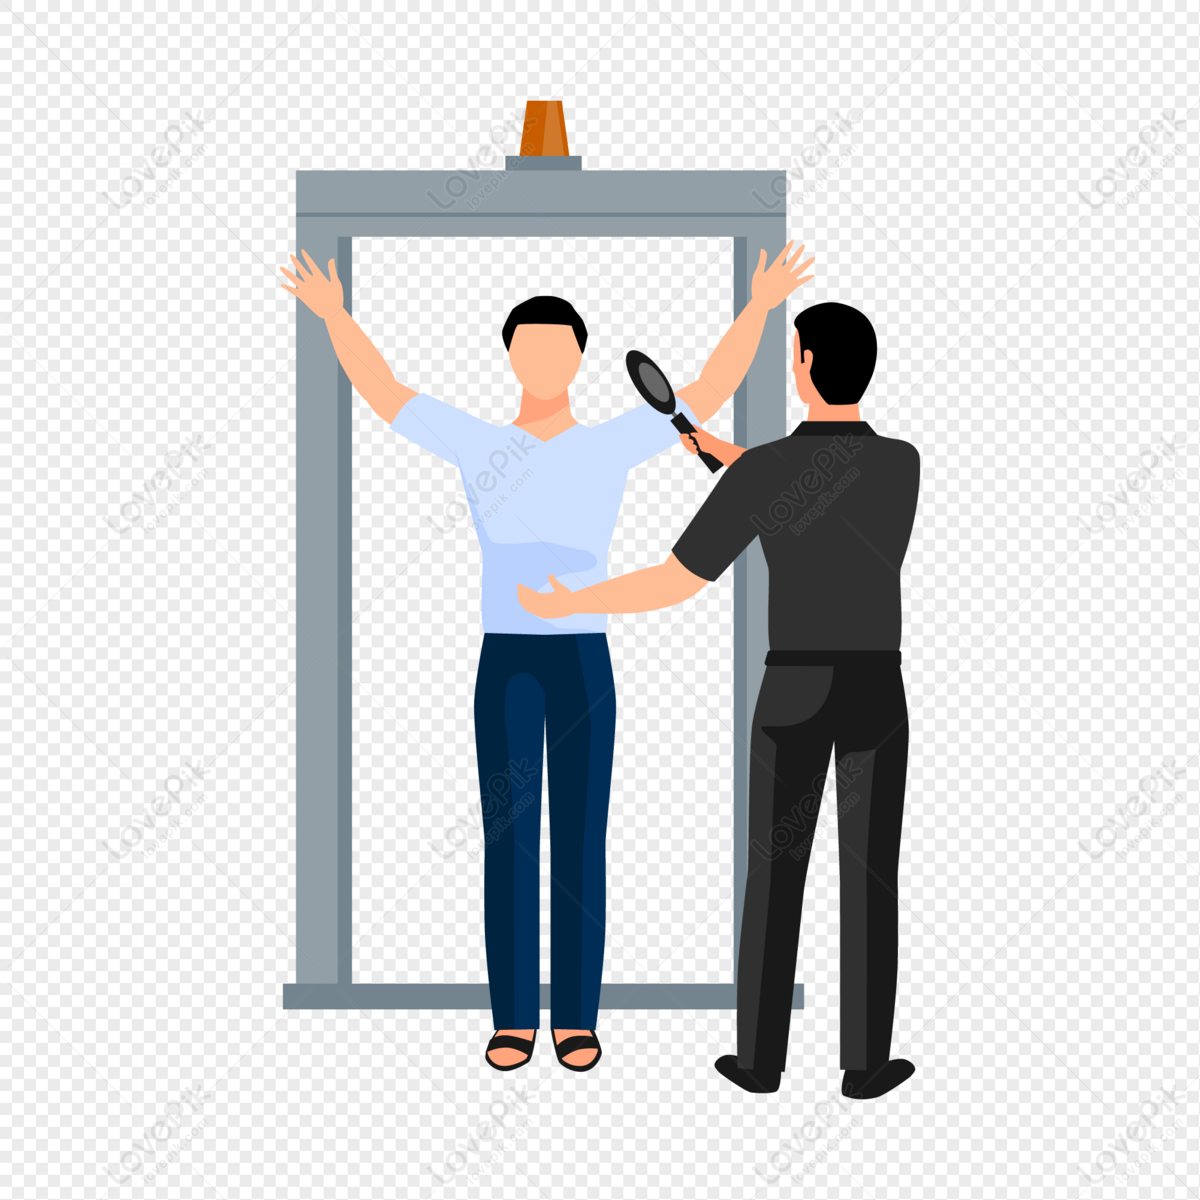 Security check, door drawing, man person, check png transparent background